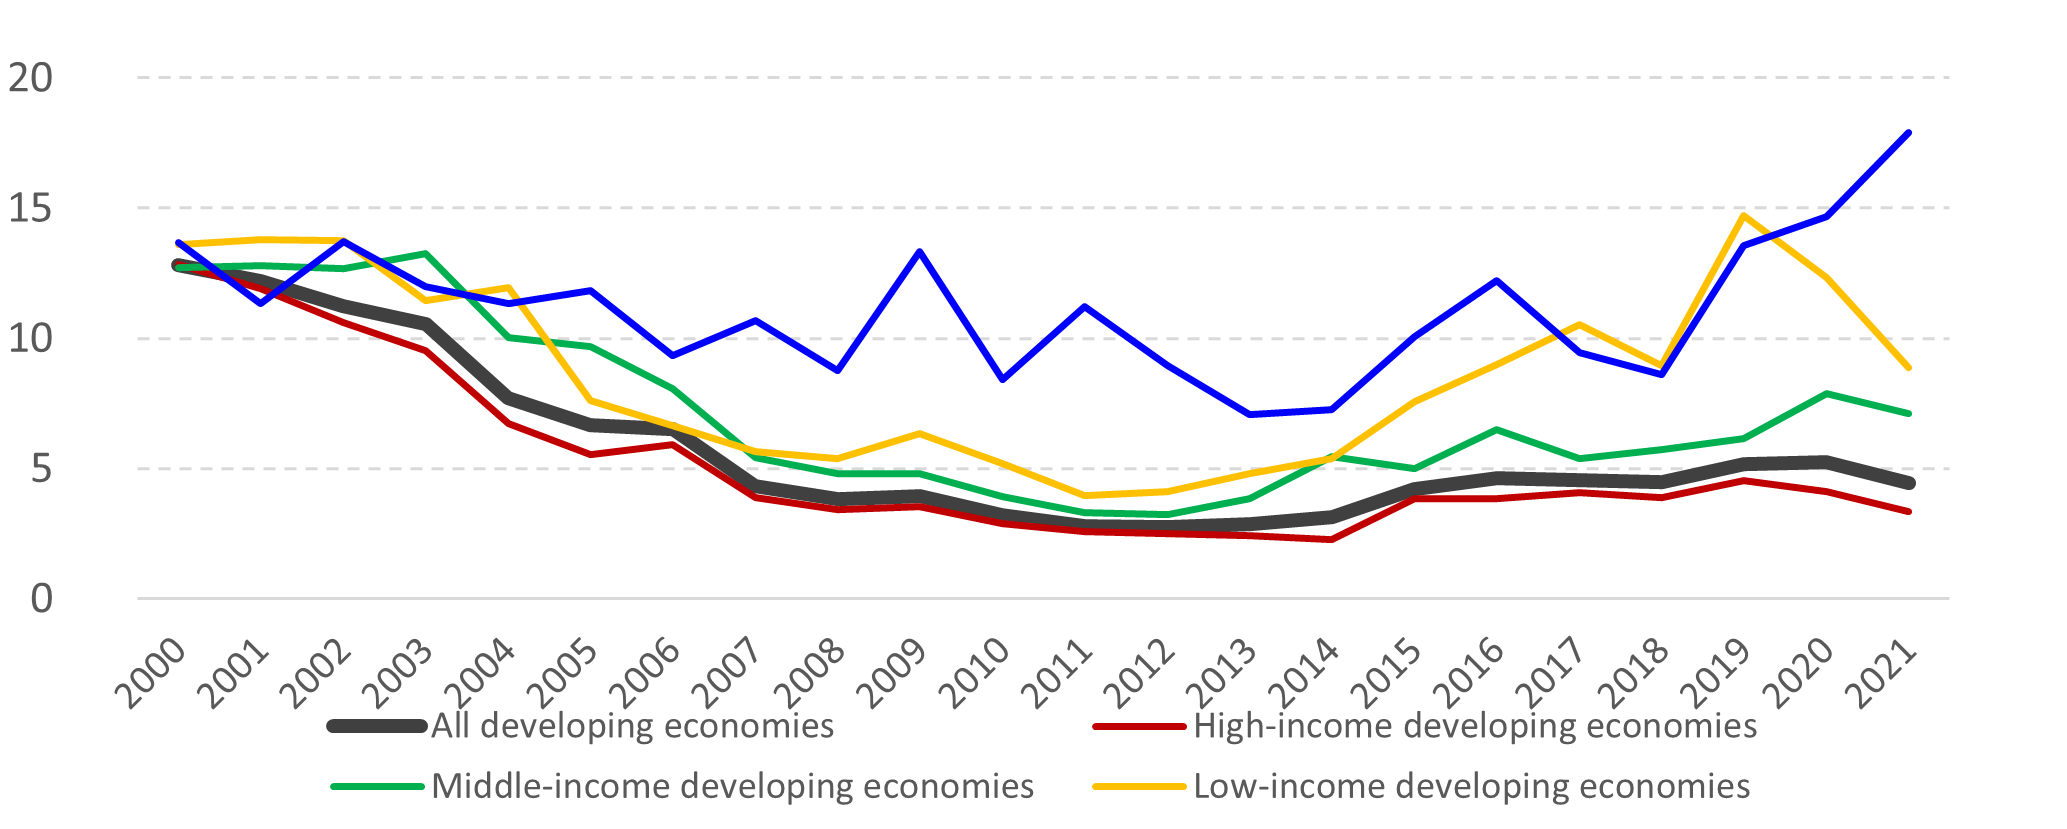 Debt service on long-term external public and publicly guaranteed (PPG) debt by groups of economies (SDG 17.4.1) as % of exports in goods and services (2000-2021)